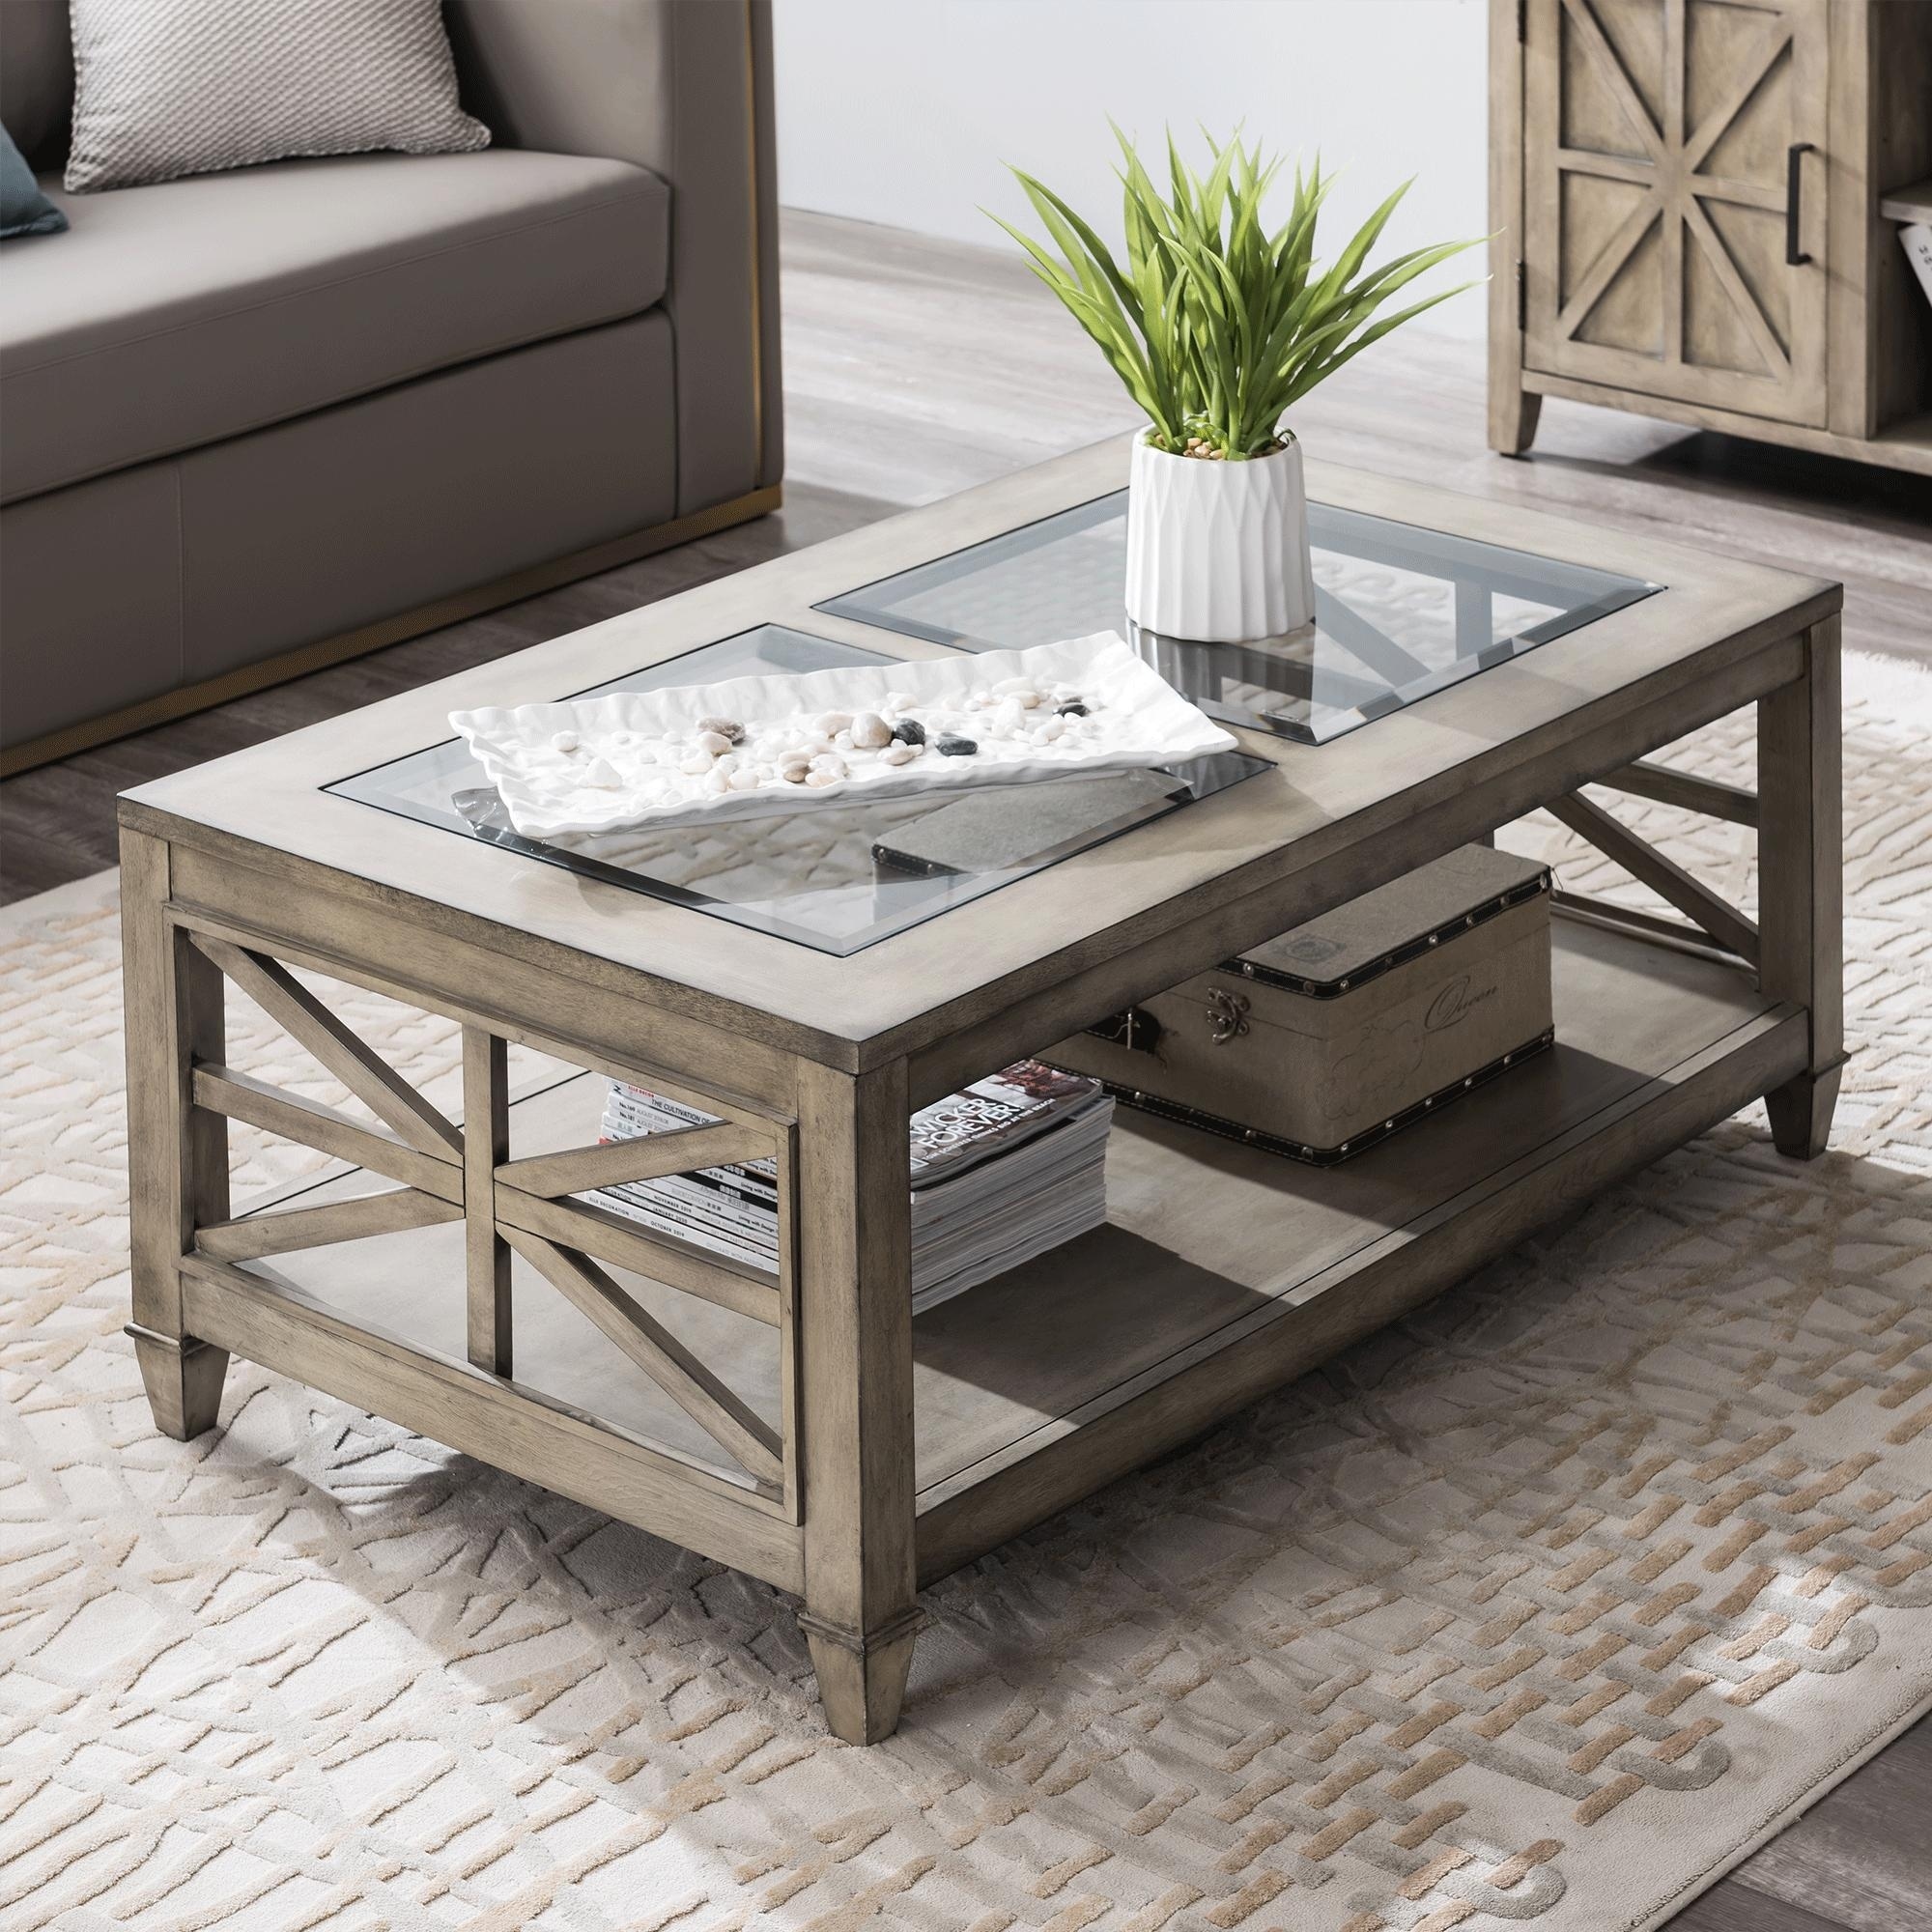 COCKTAIL TABLE Coffee Table with Storage 45.5*26*19H - Bed Bath